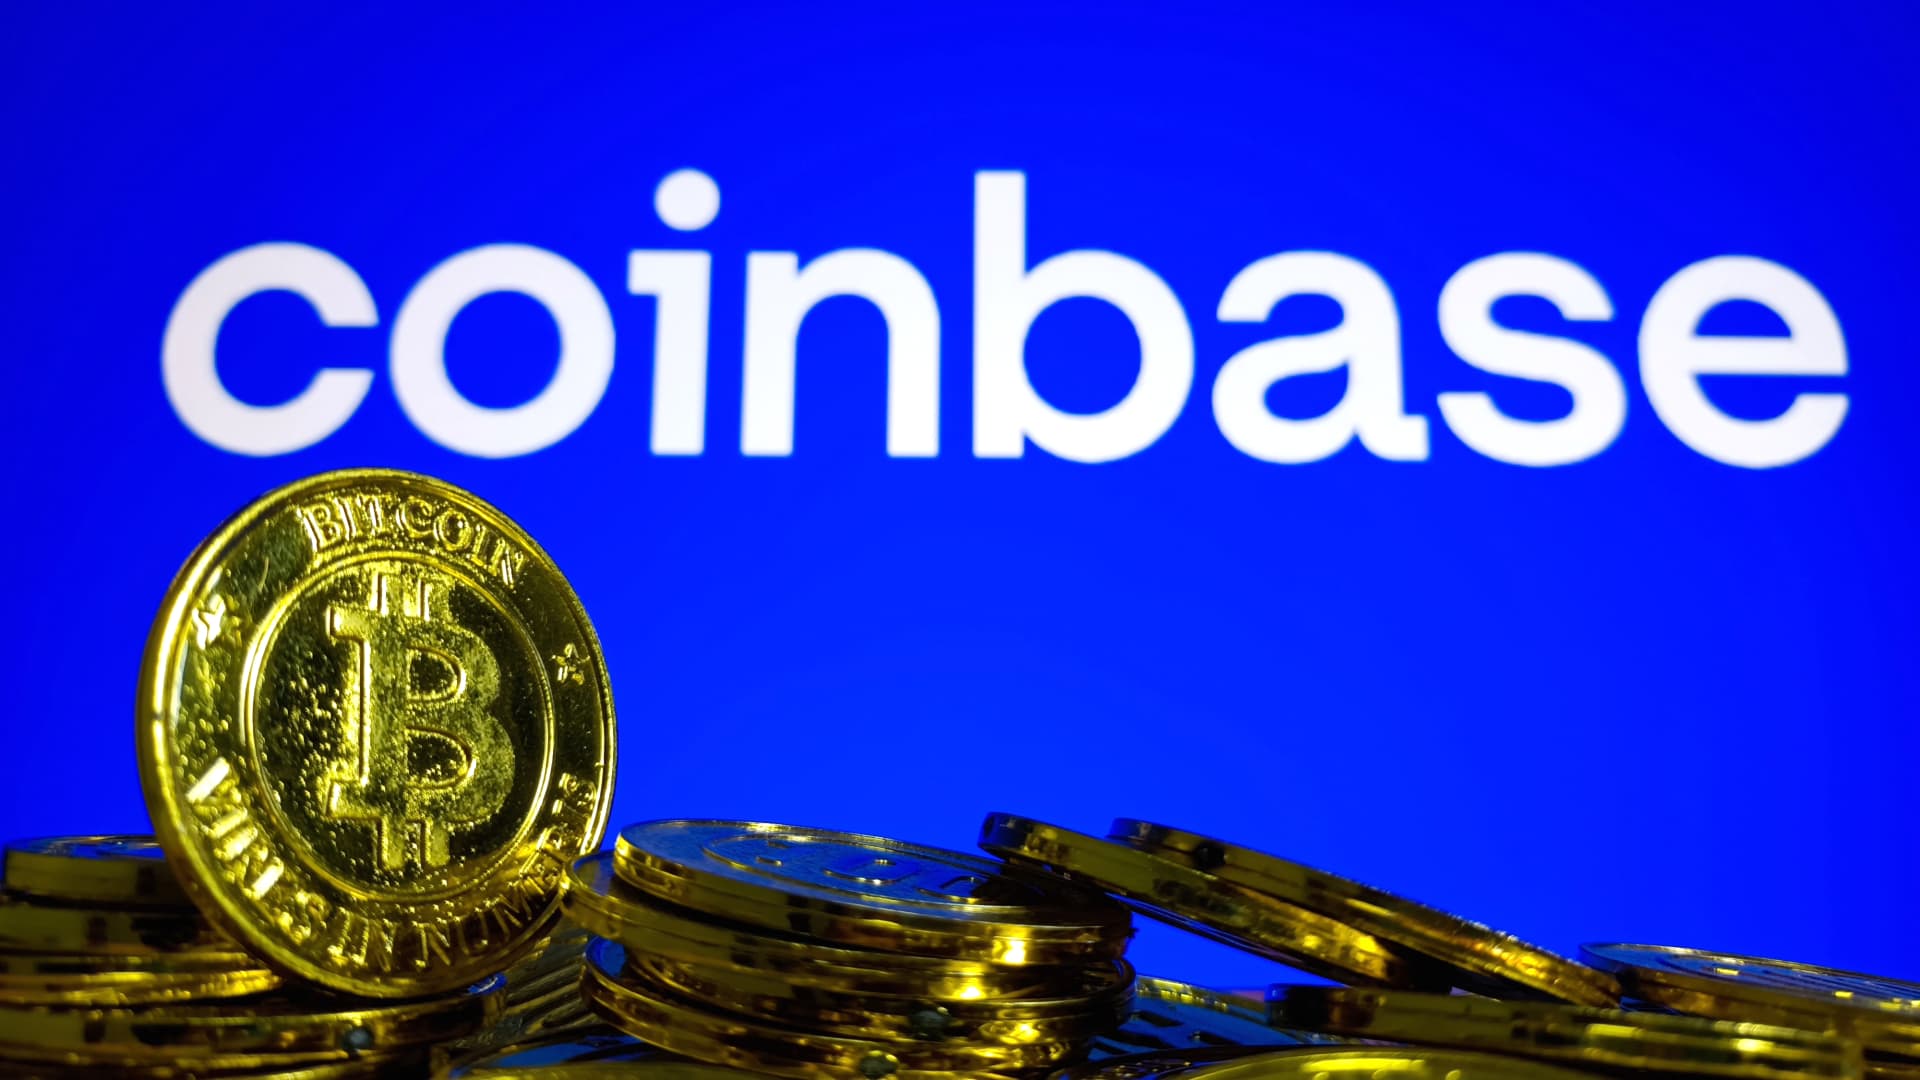 Coinbase secures restricted dealer license in Canada, pushing expansion abroad amid SEC crackdown